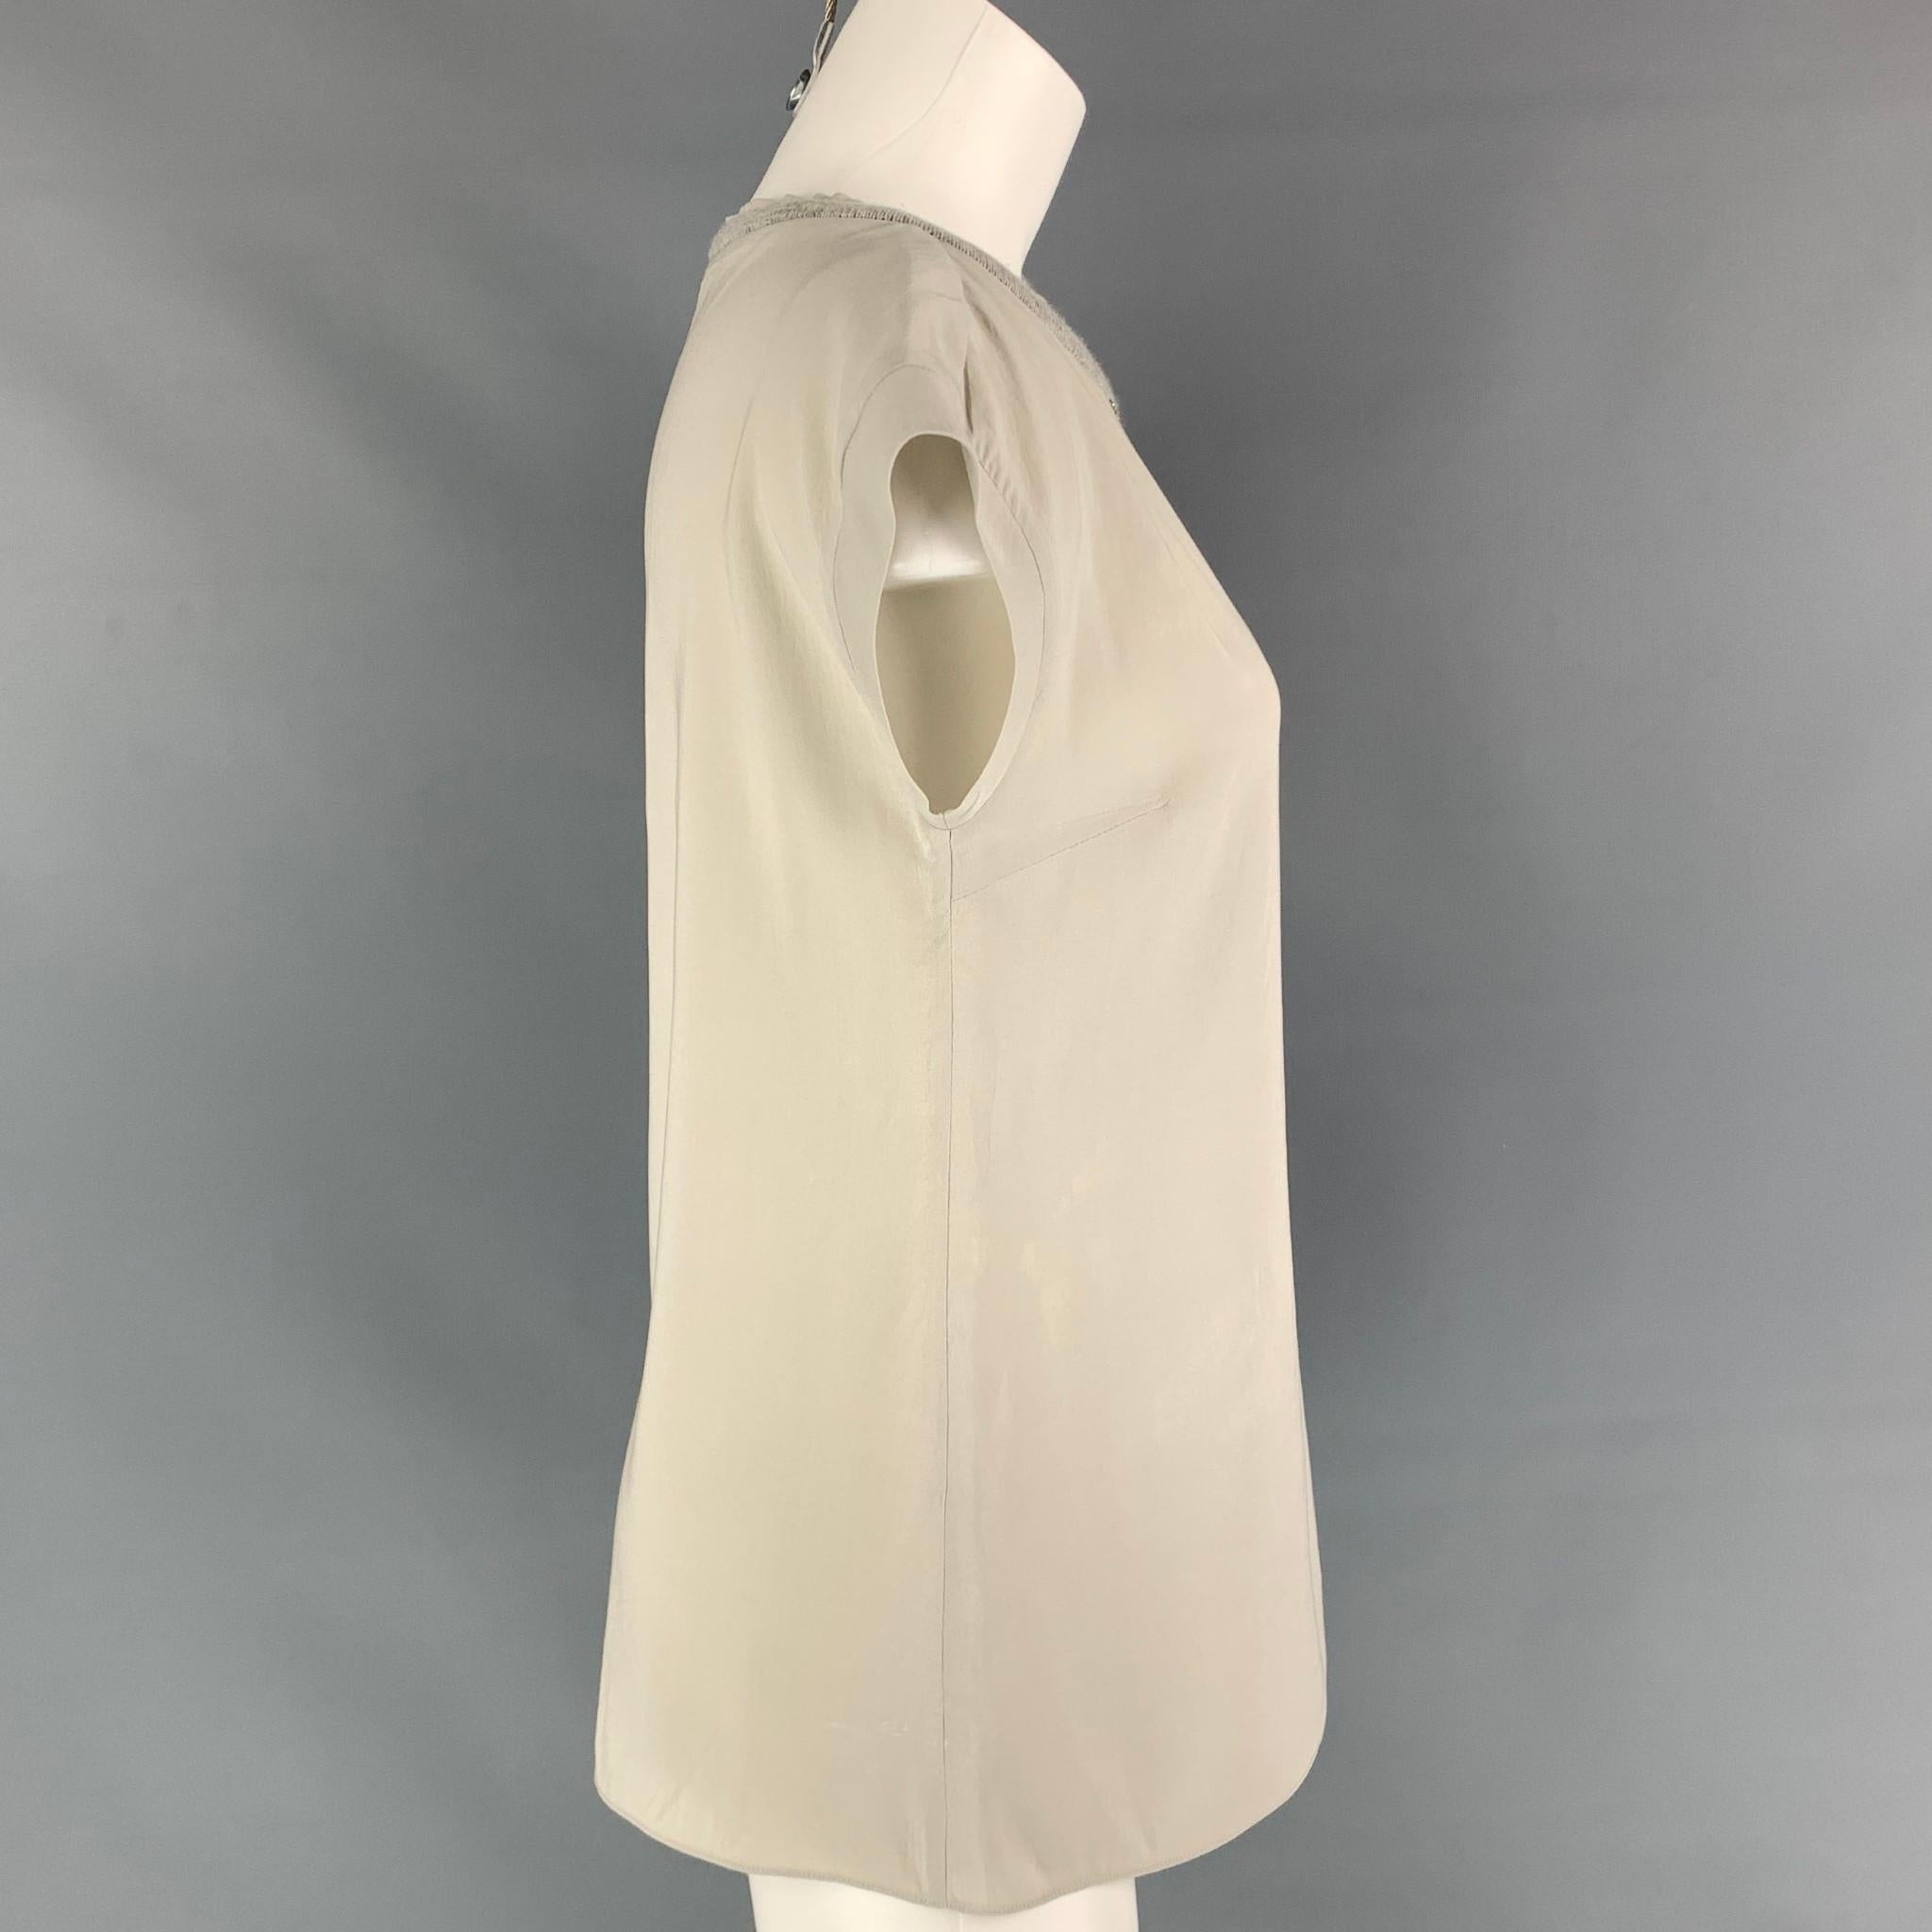 BRUNELLO CUCINELLI blouse comes in a grey rayon blend featuring a sleeveless style, rhinestone details, and a cashmere trim. As-Is. Made in Italy. 

Good Pre-Owned Condition. Moderate discoloration at front & back.
Marked: